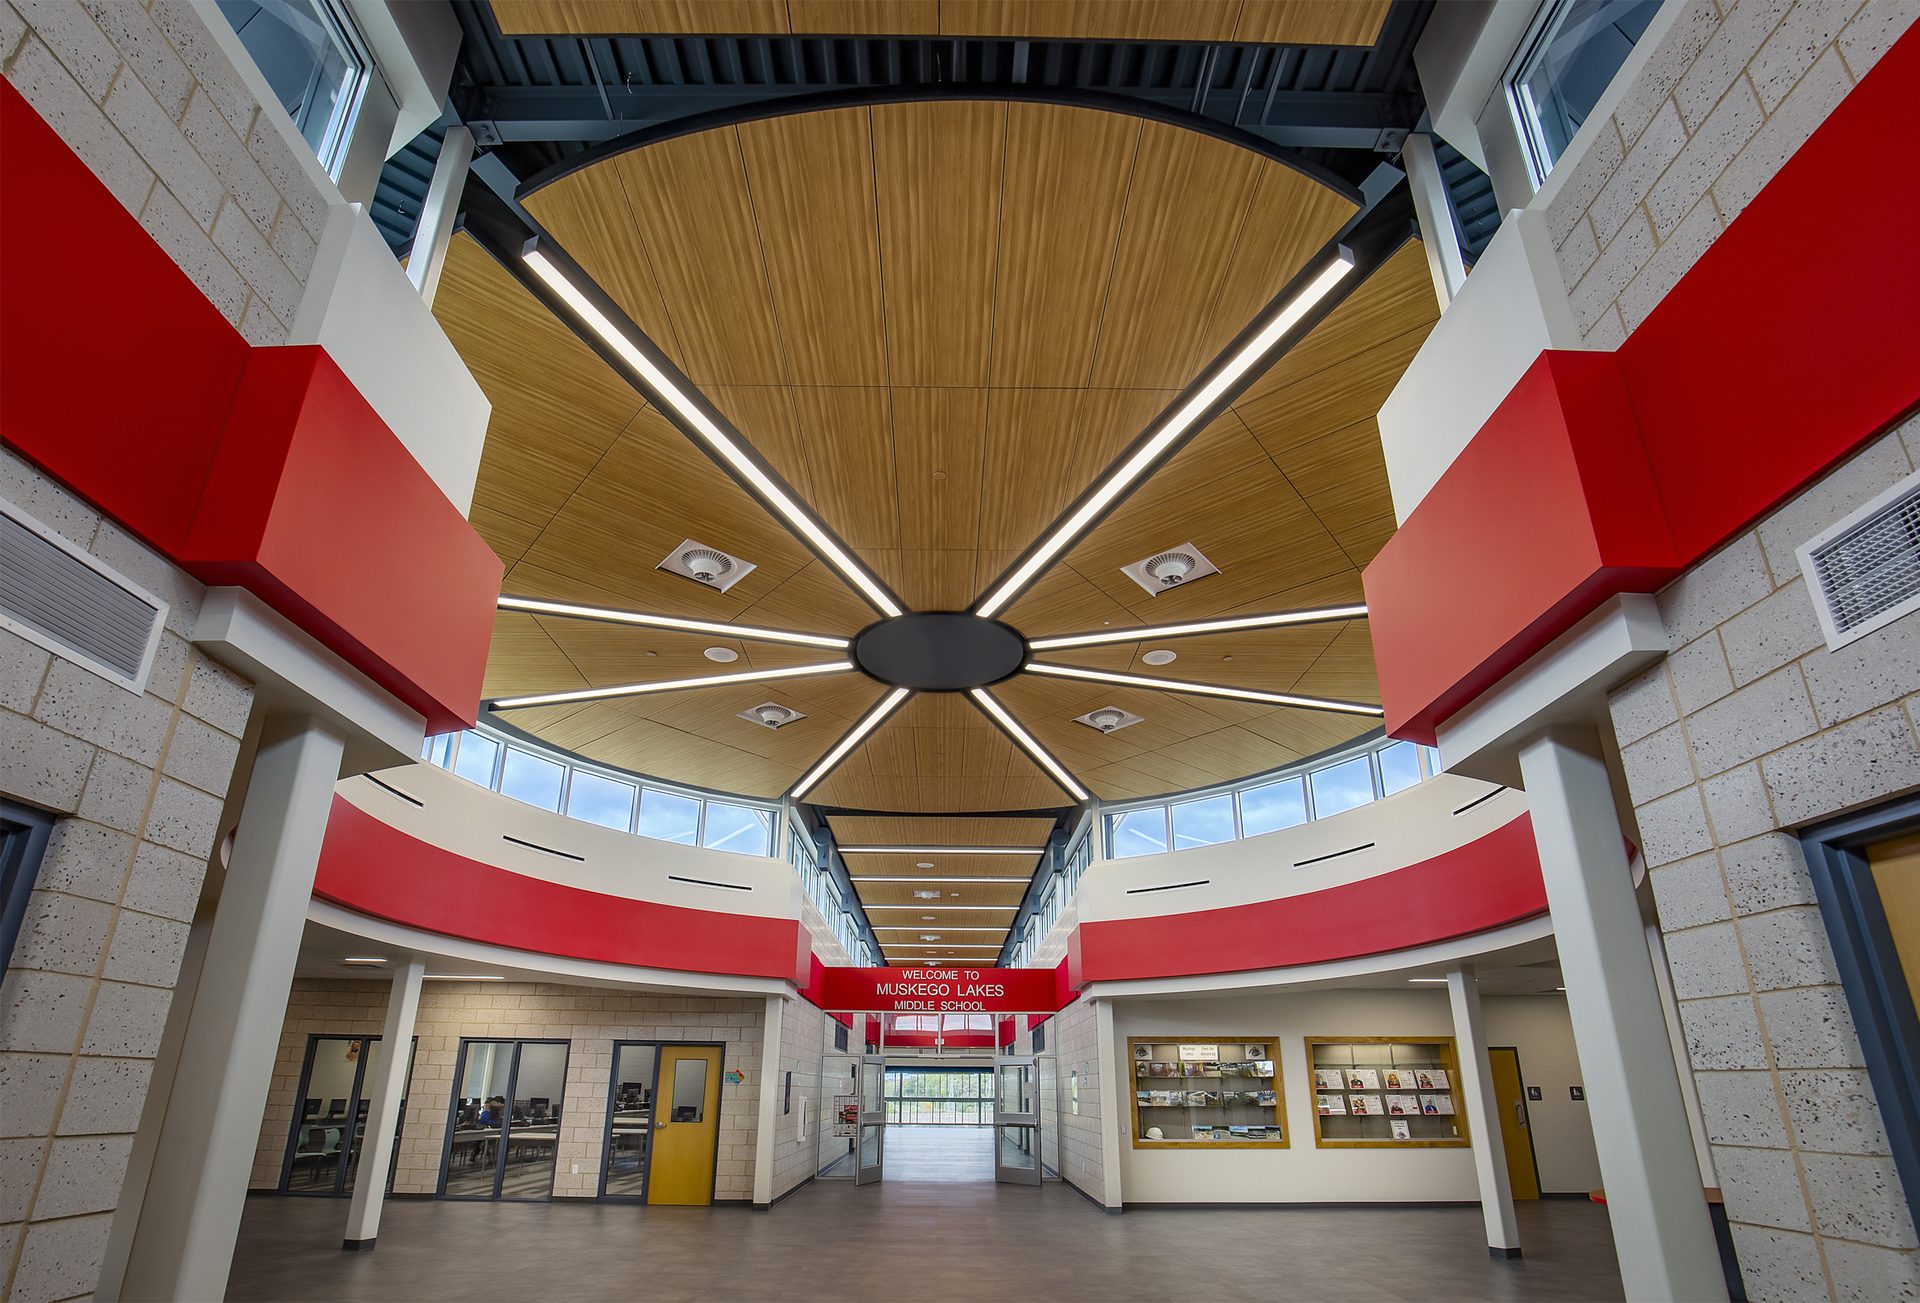 Middle School entrance with circular layout and wood finish ceiling.